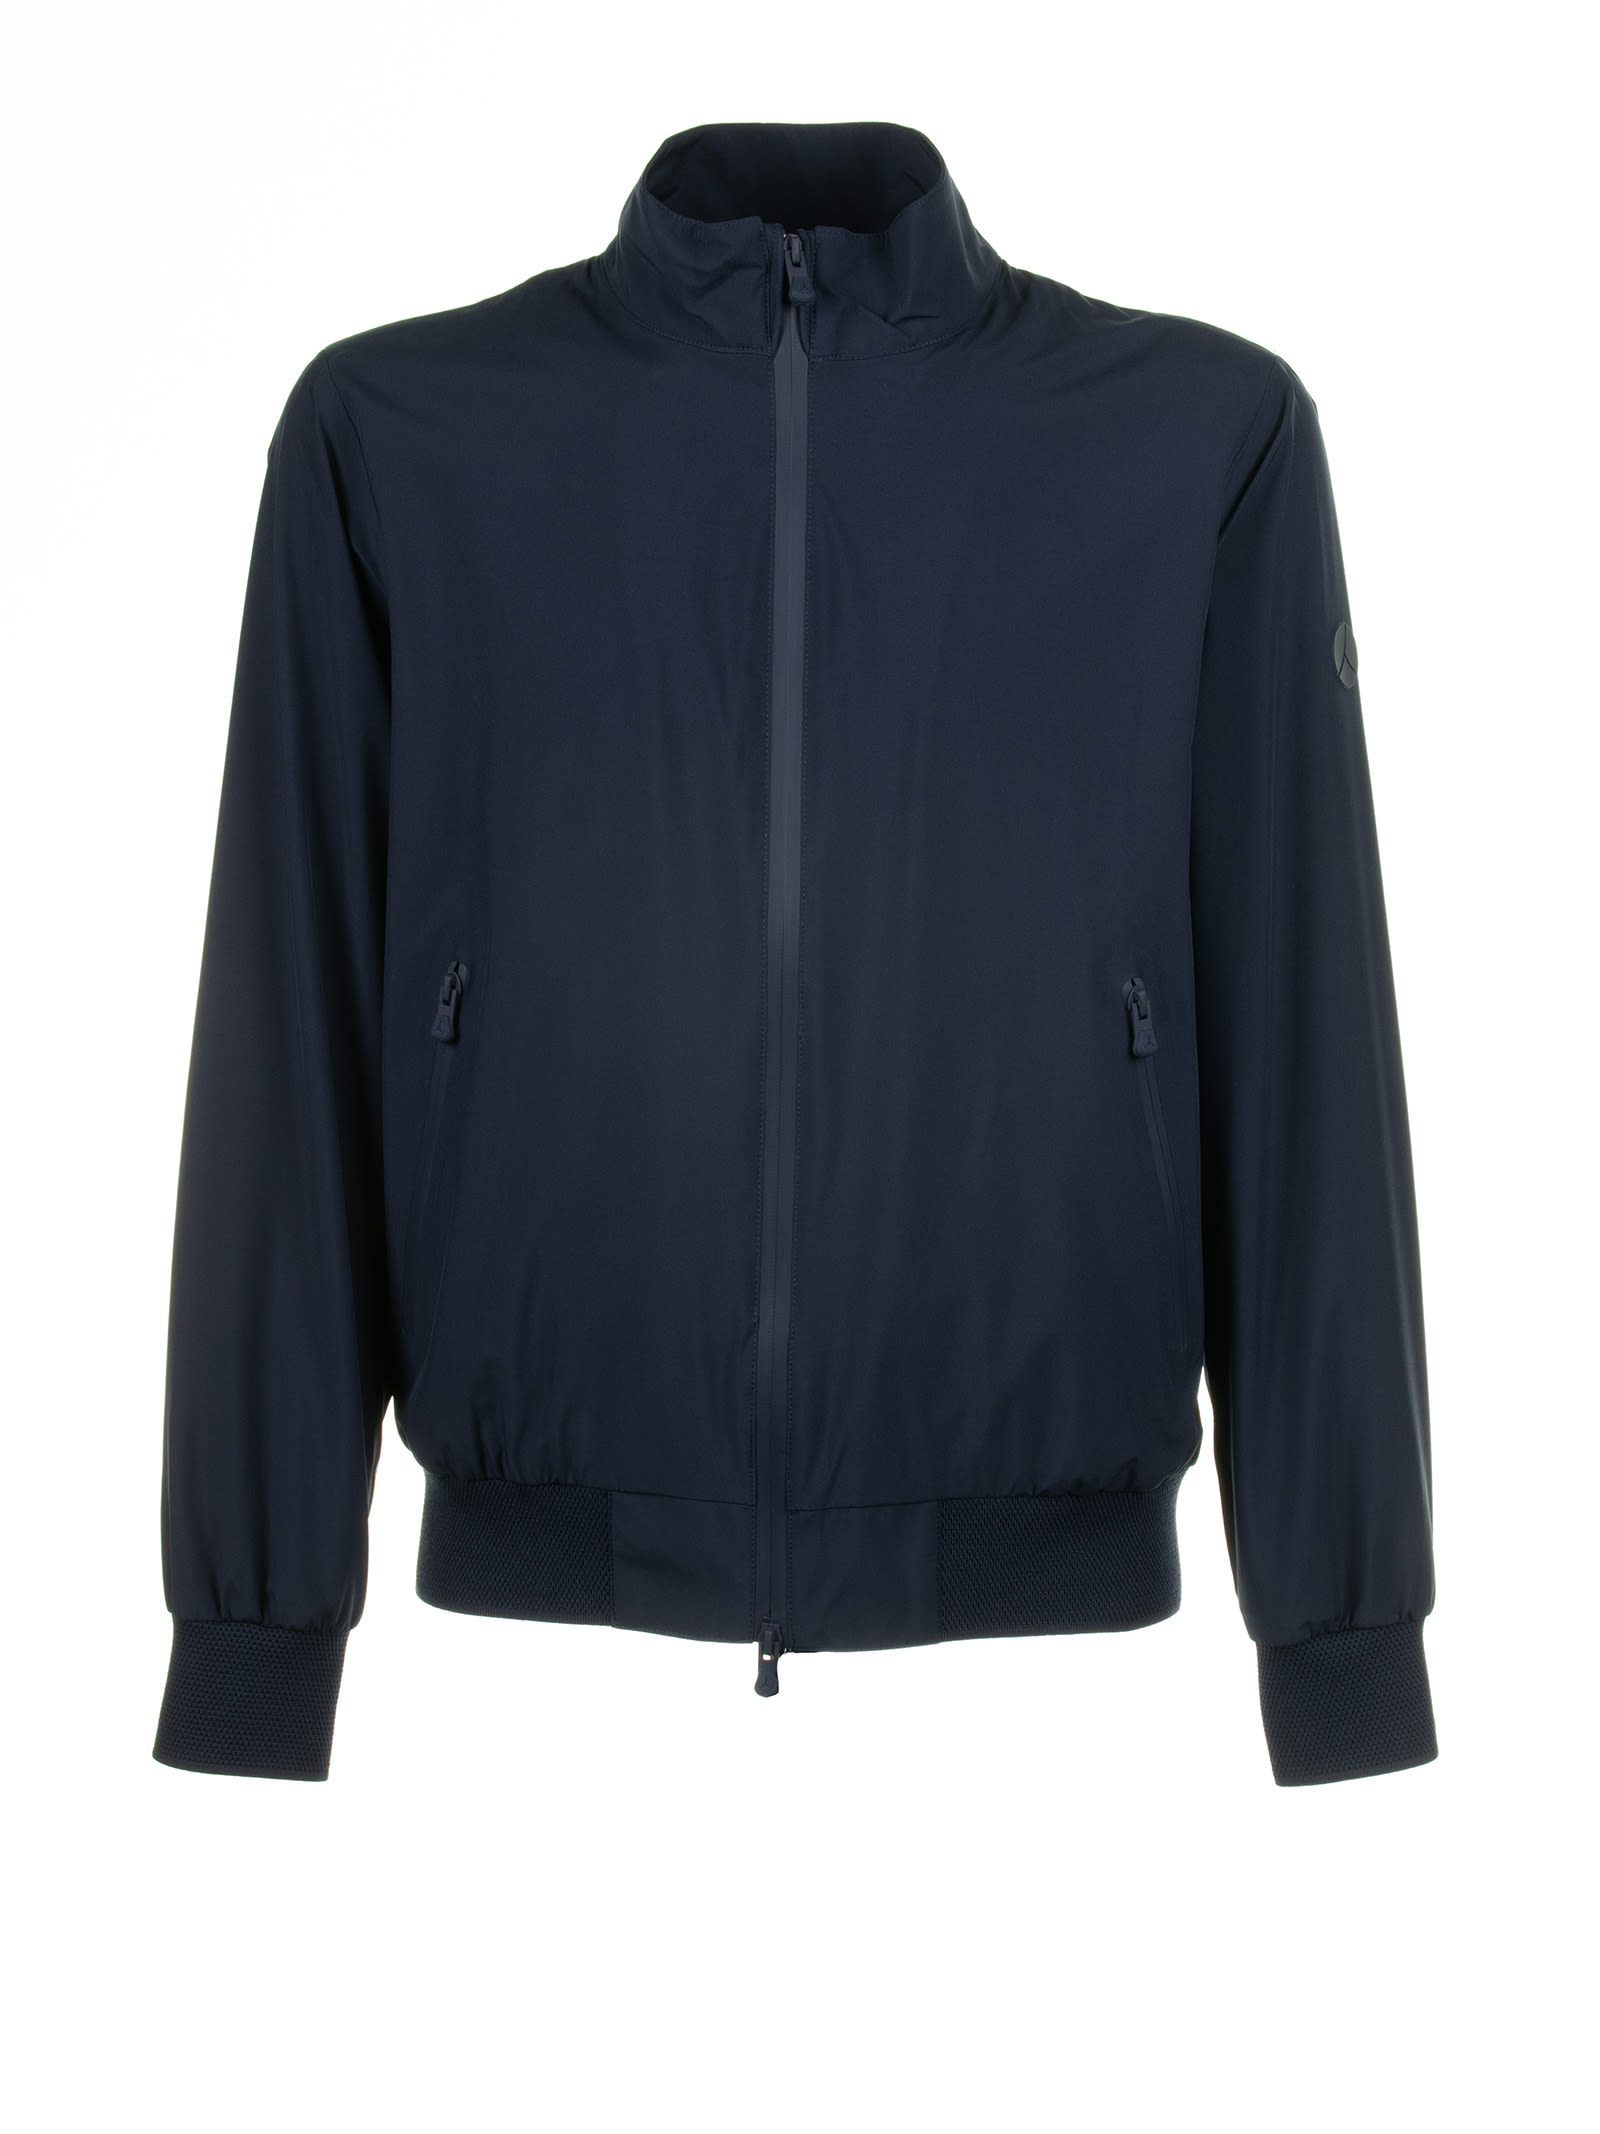 Blue Jacket With Zip And Collar